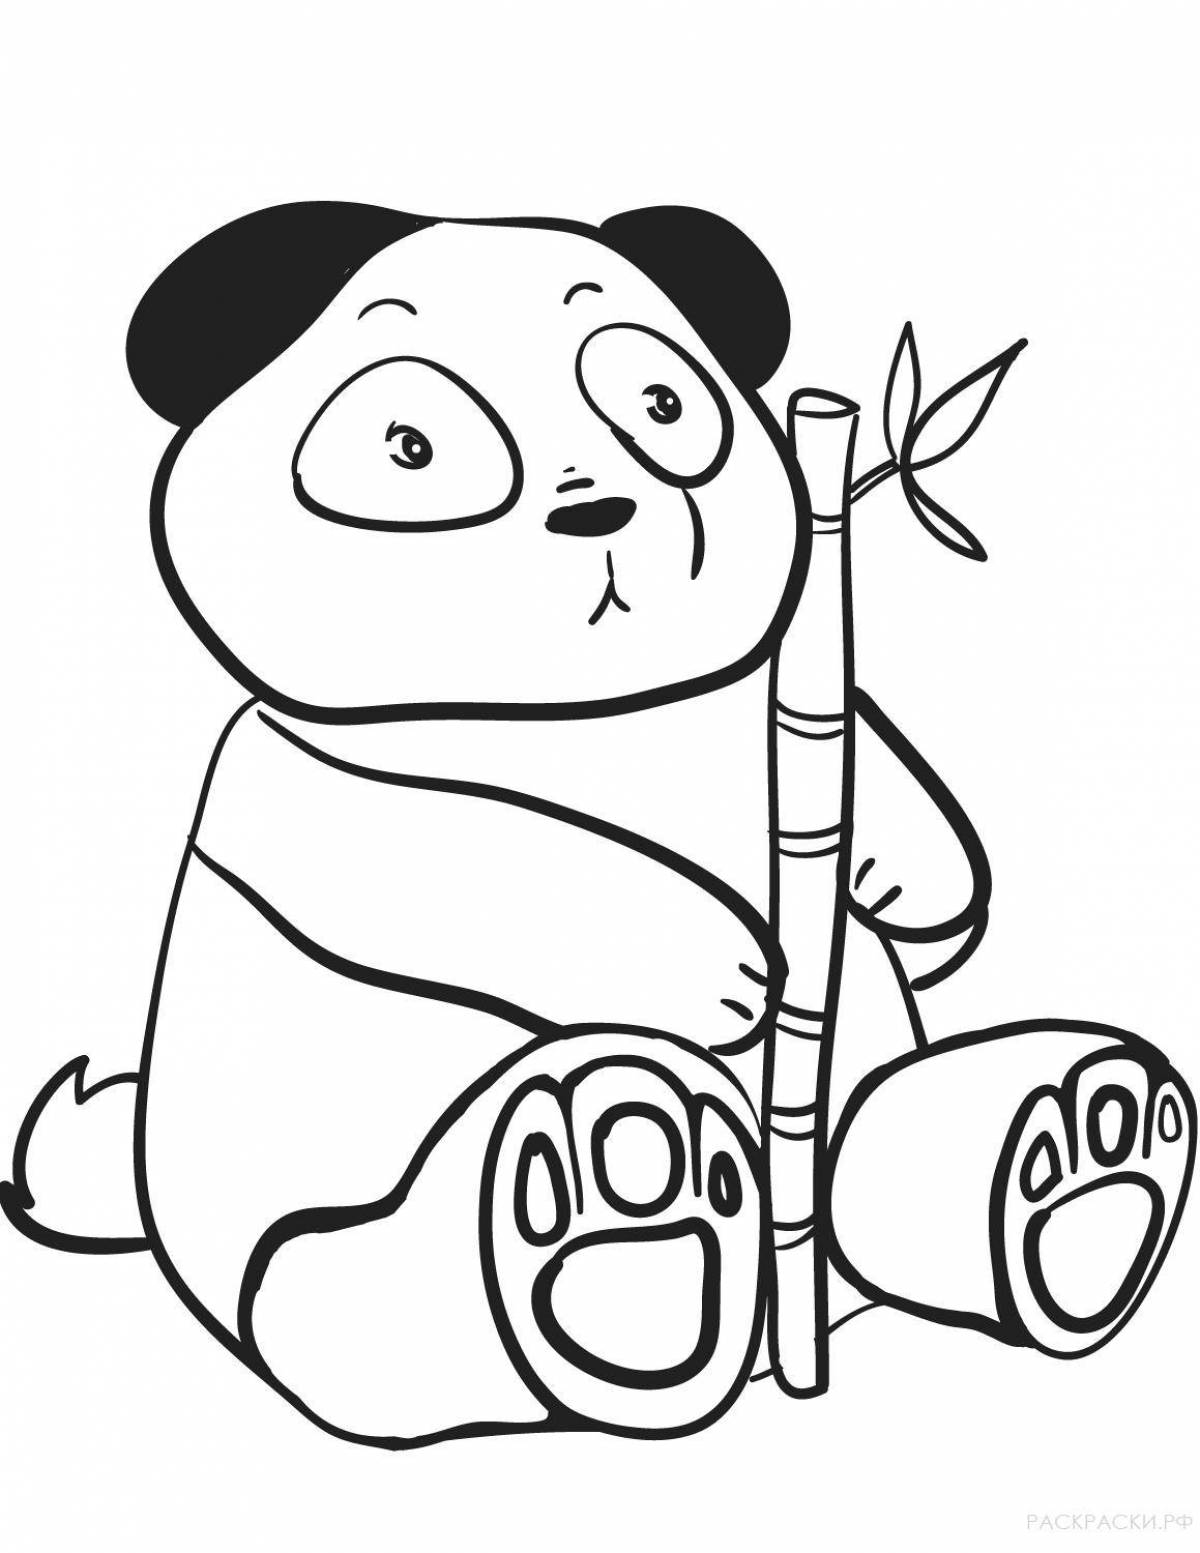 Adorable panda coloring page with bamboo